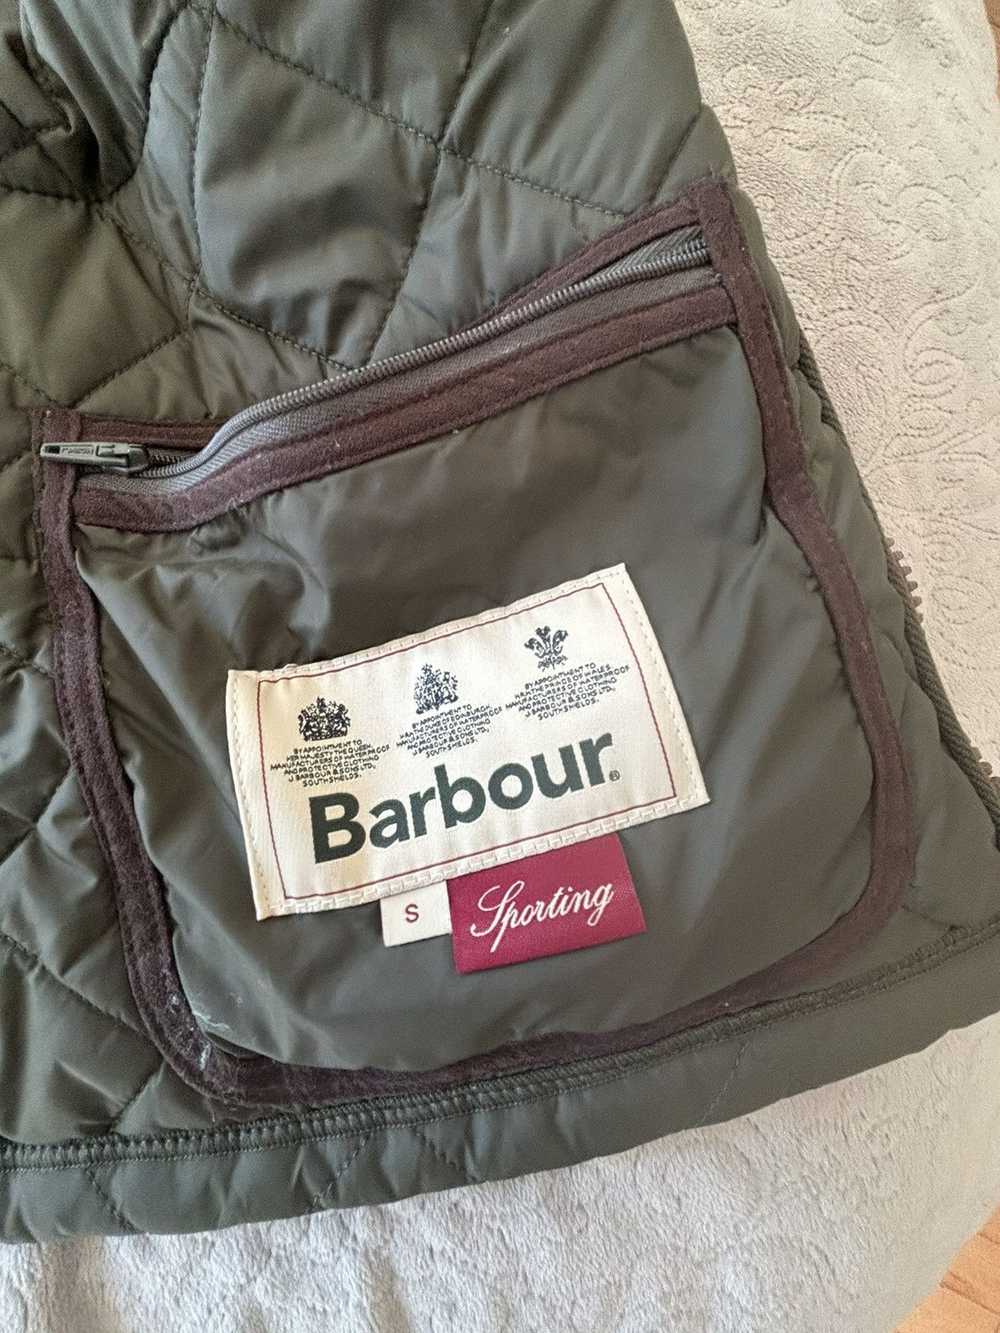 Barbour Barbour Quilted Gilet - Size Small - image 3